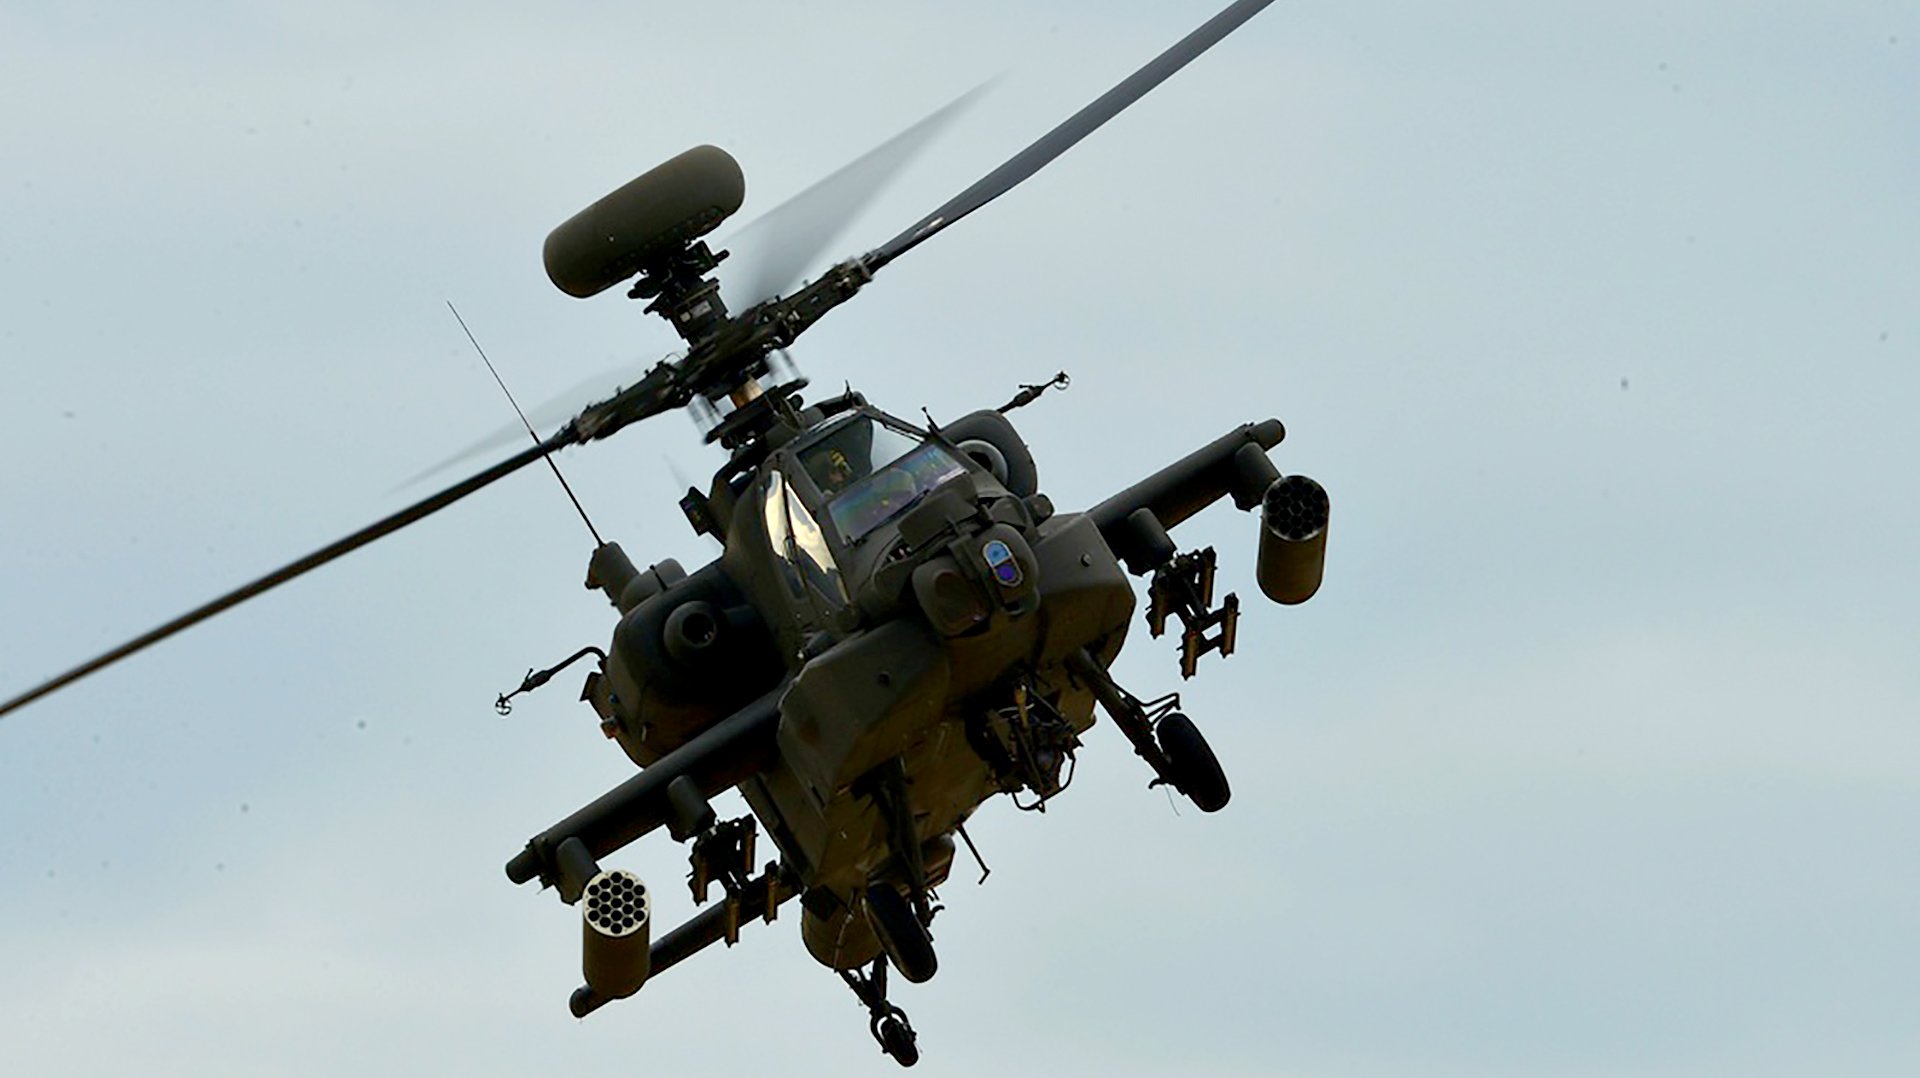 An AH-64 Apache assigned to the 1-130 Attack Recon Battalion, North Carolina Army National Guard. U.S. Air Force photo by Airman 1st Class Diana M. Cossaboom.